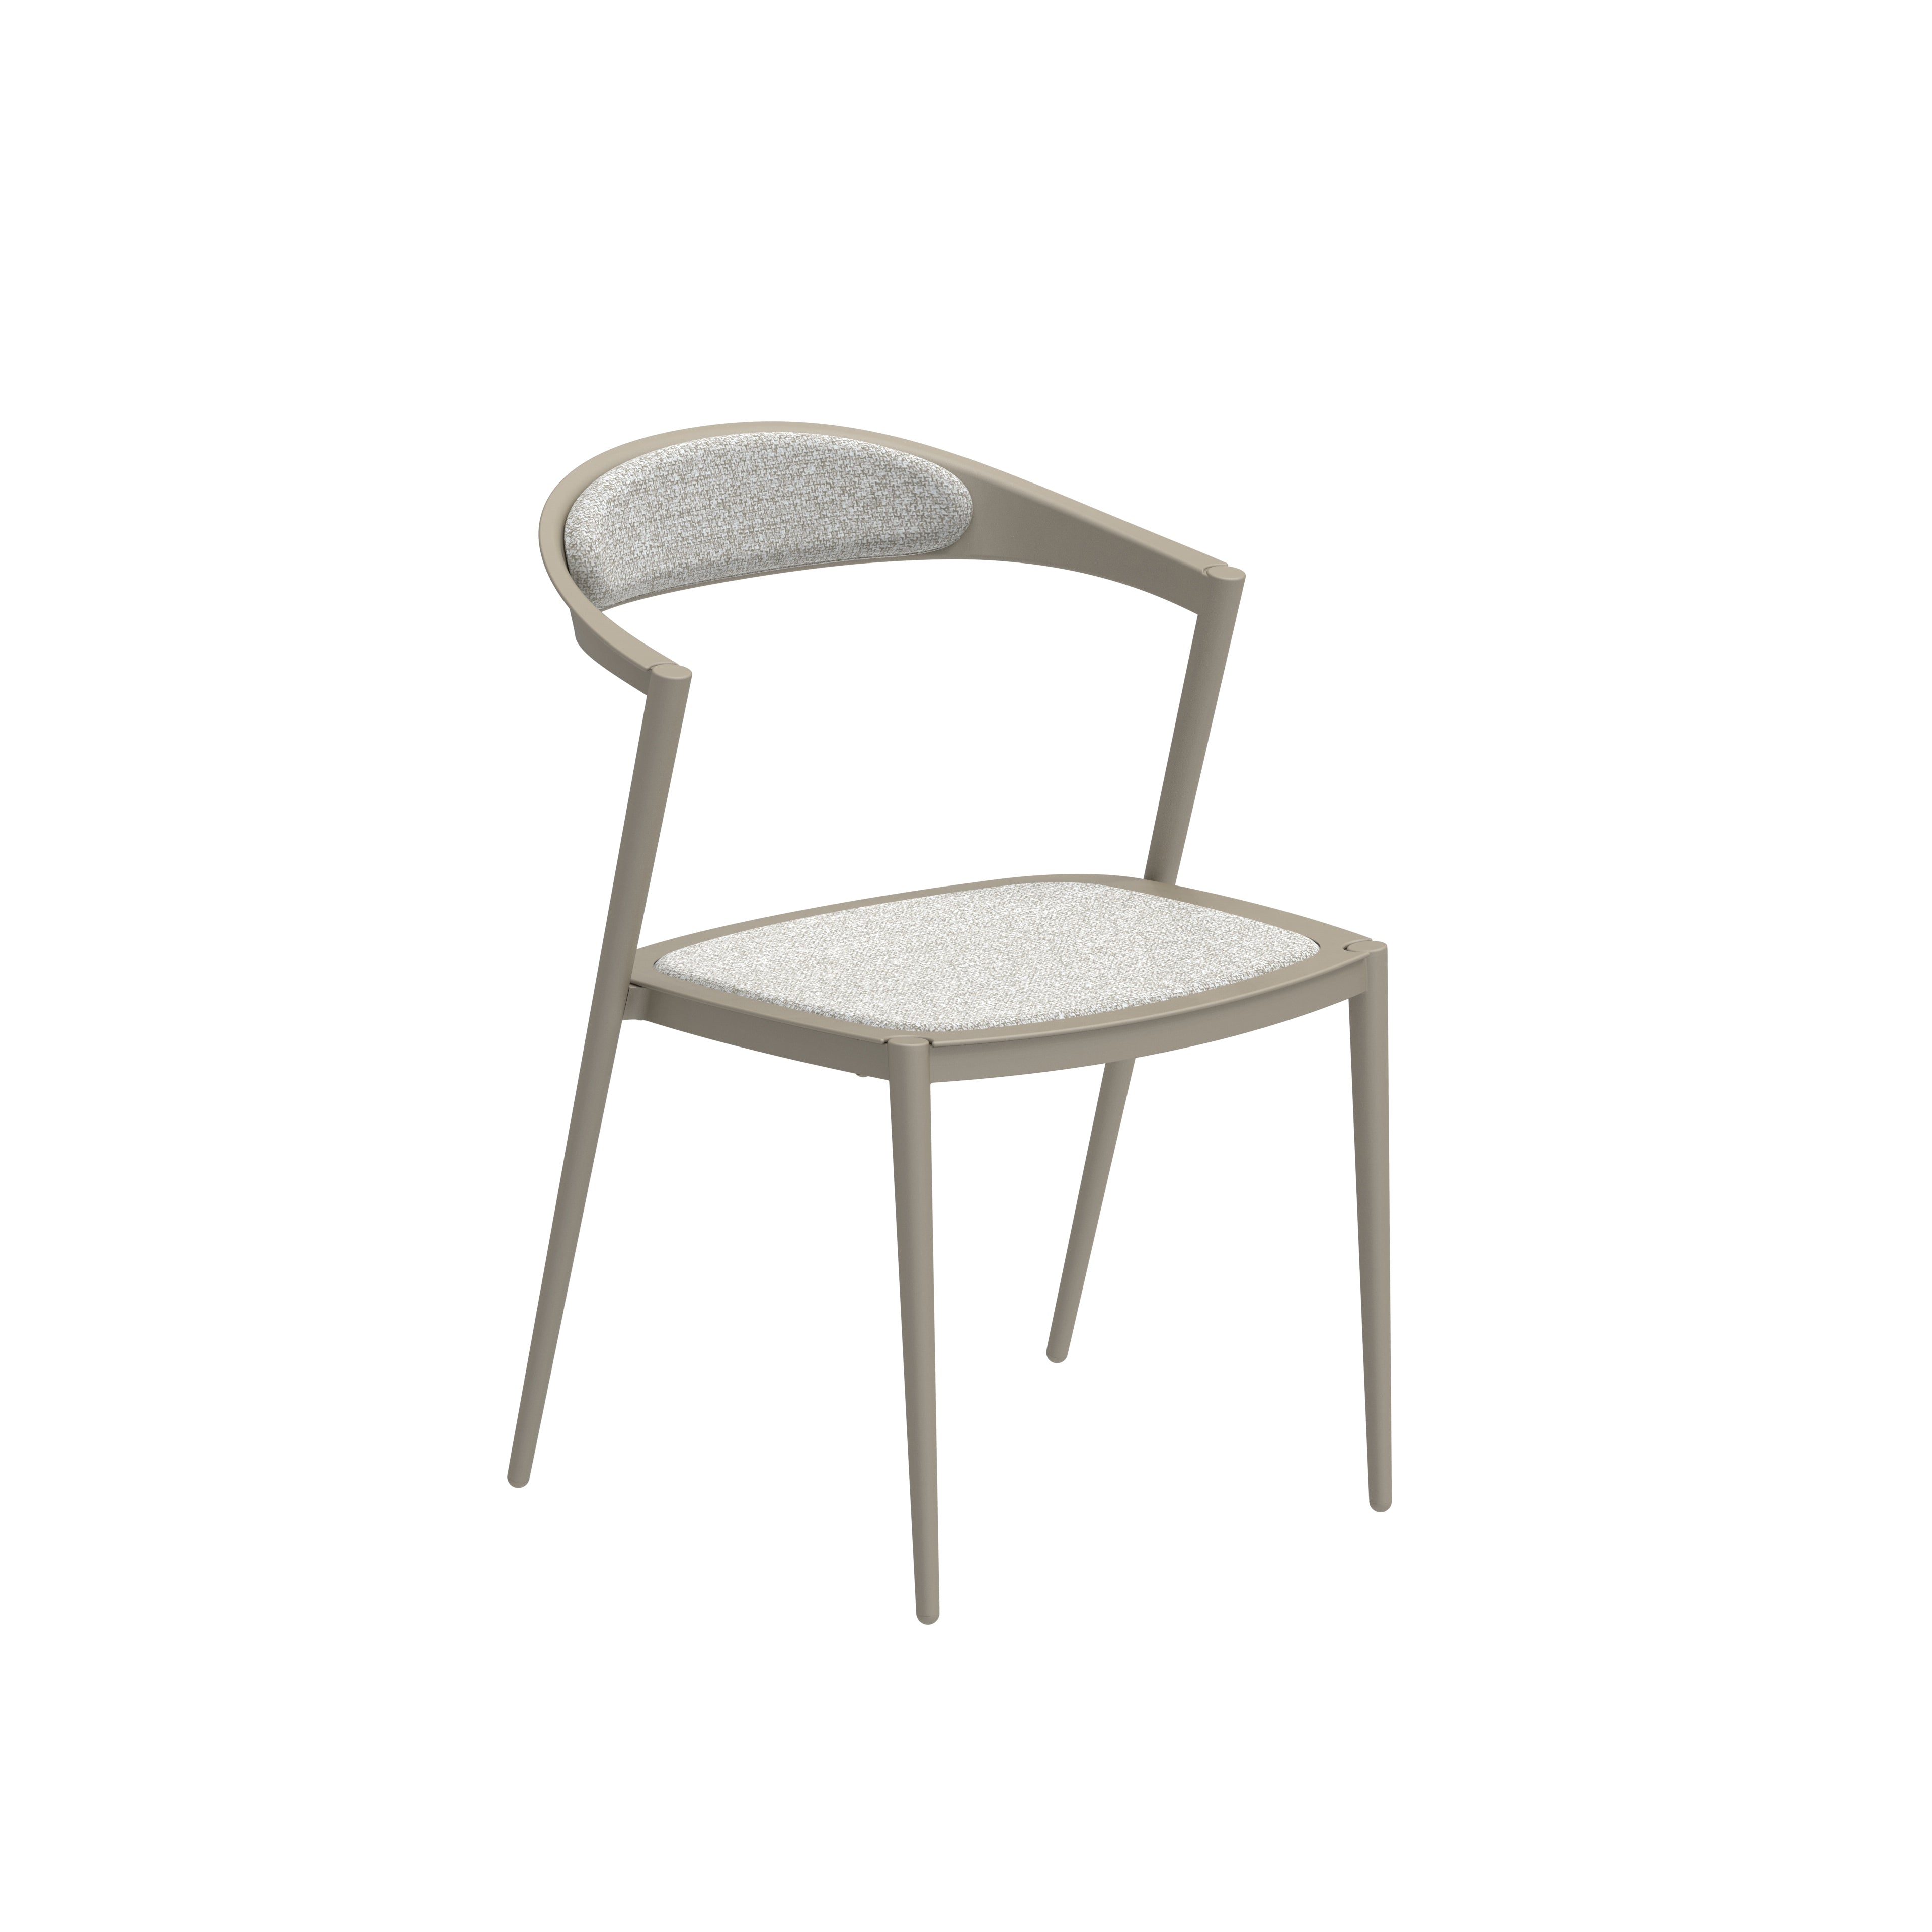 Chair STYLETTO 55 sand